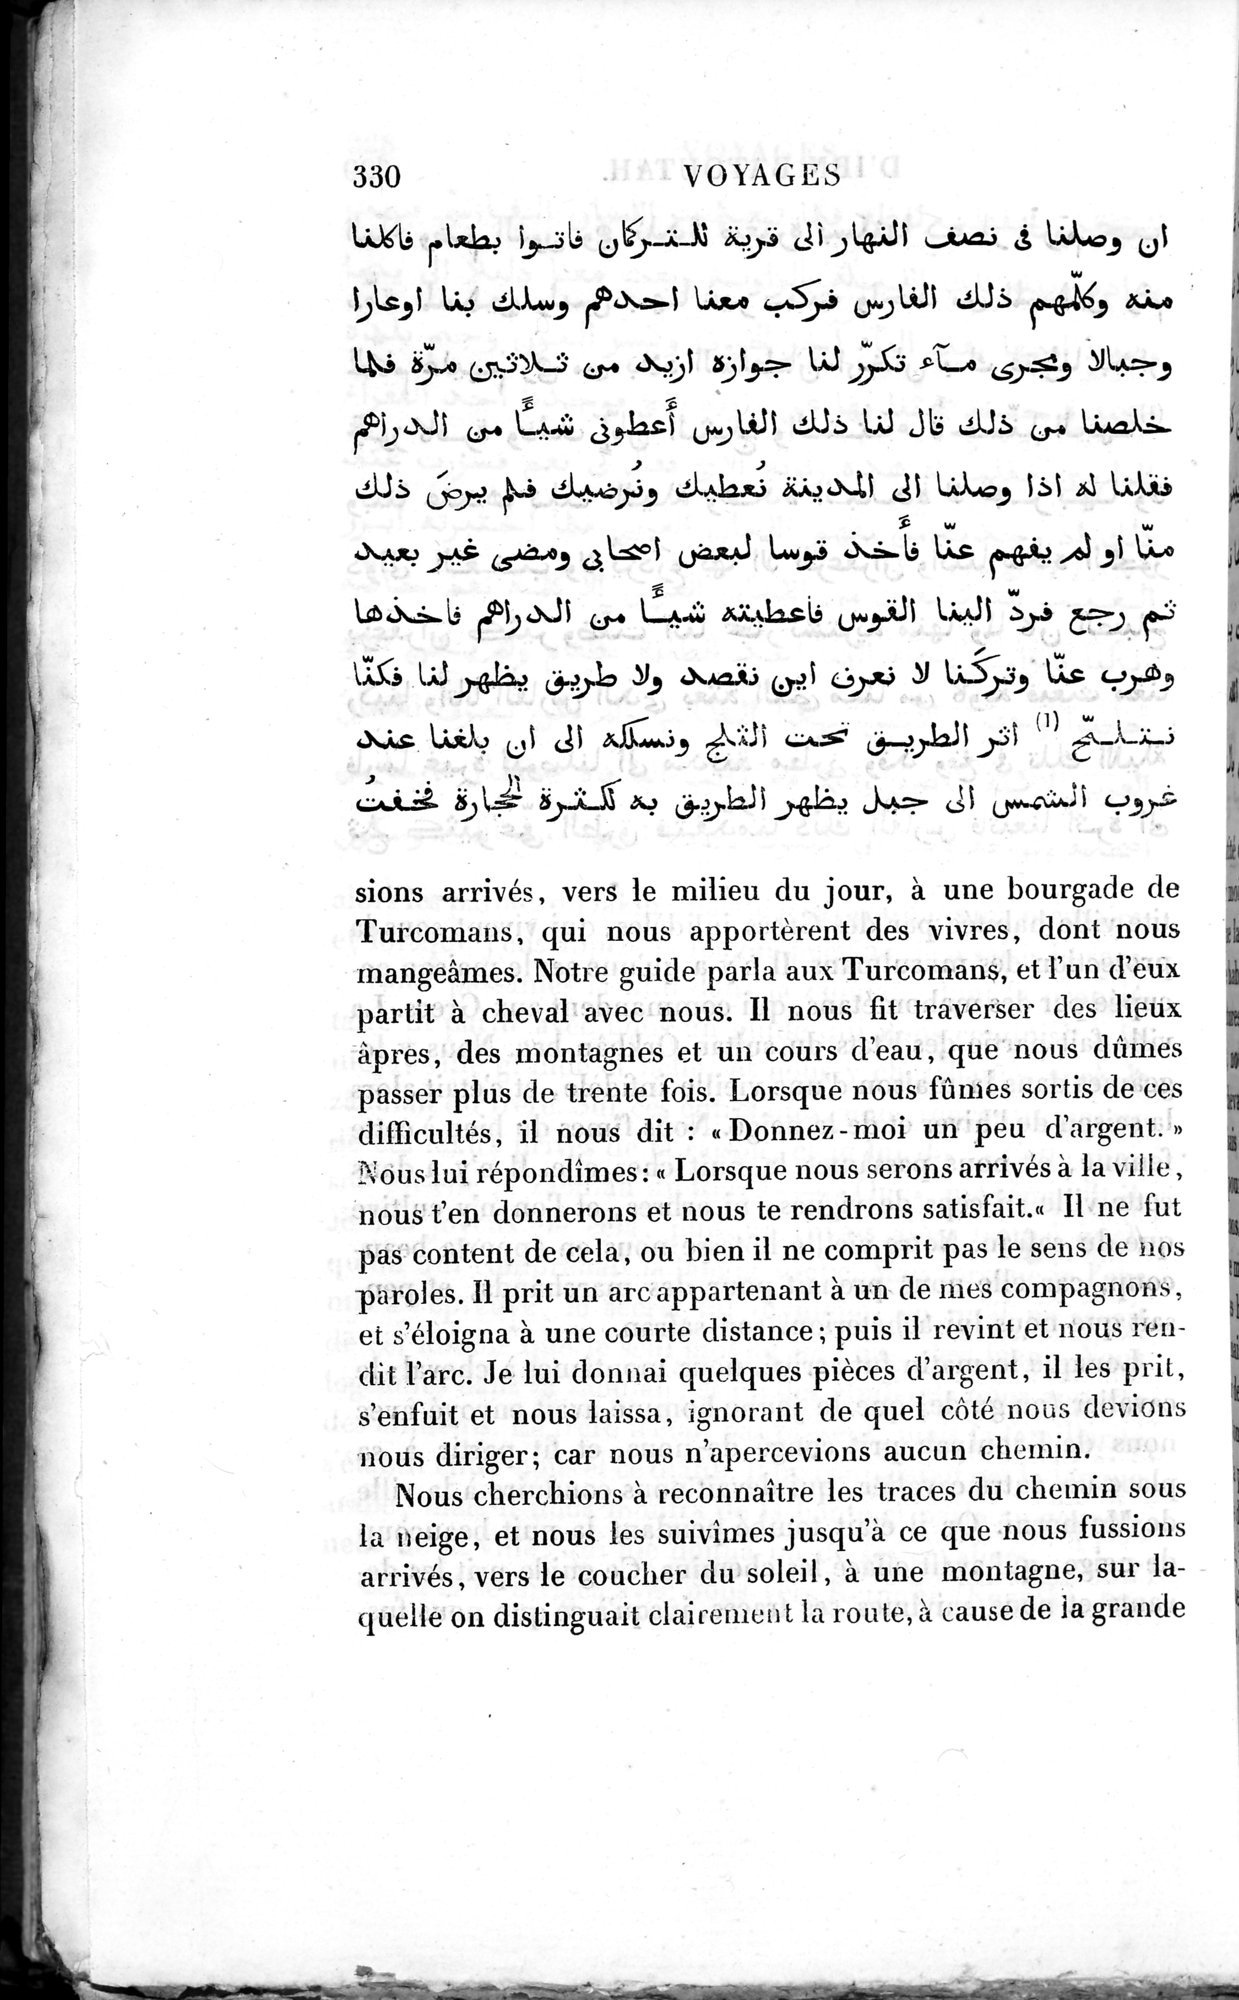 Voyages d'Ibn Batoutah : vol.2 / Page 358 (Grayscale High Resolution Image)